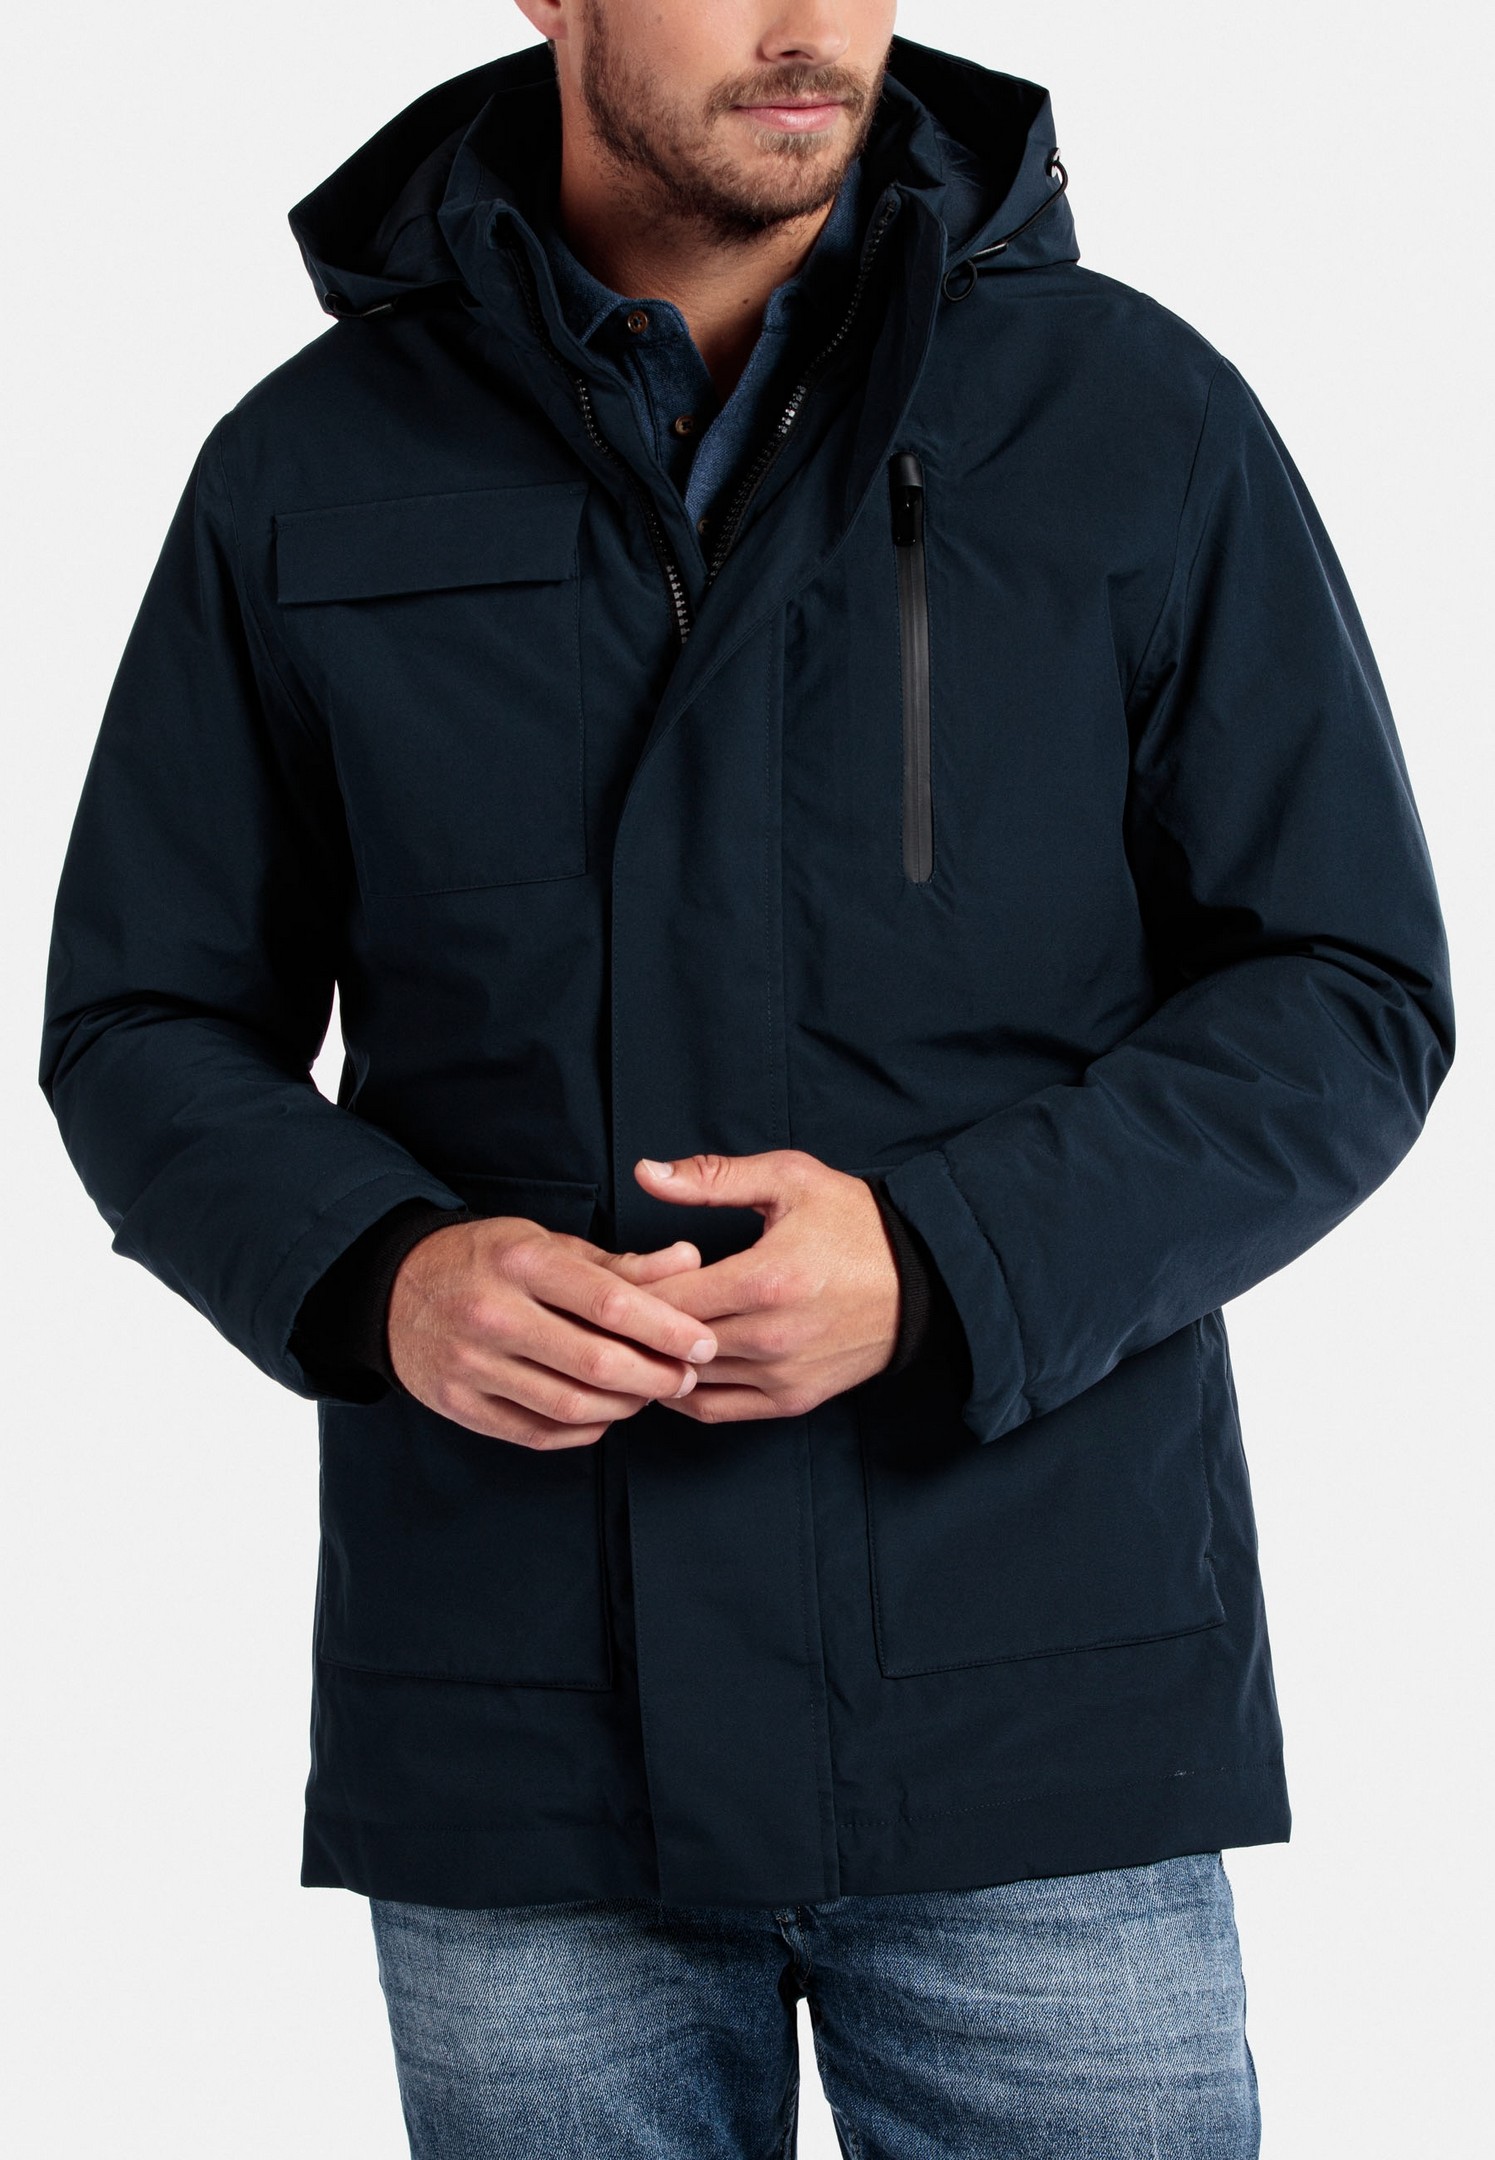 Giordano Jan Fashion Removable Hood Windproof Navy Water Jacket | and Men\'s Dark Rozing